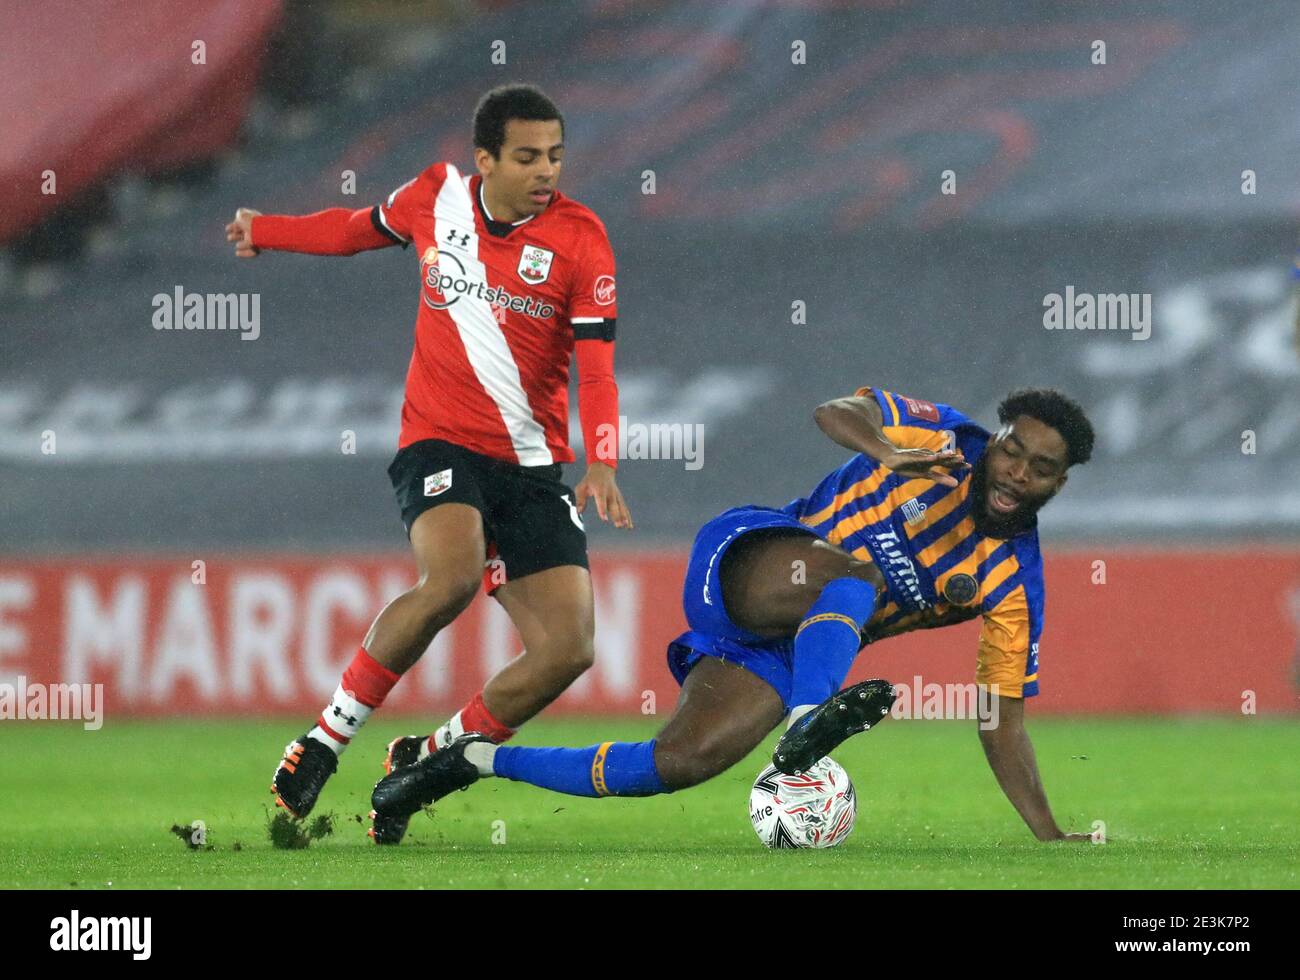 Southampton's Caleb Watts (left) and Shrewsbury Town's Ro-Shaun Williams (right) battle for the ball during the Emirates FA Cup third round match at St Marys Stadium, Southampton. Picture date: Tuesday January 19, 2021. Stock Photo